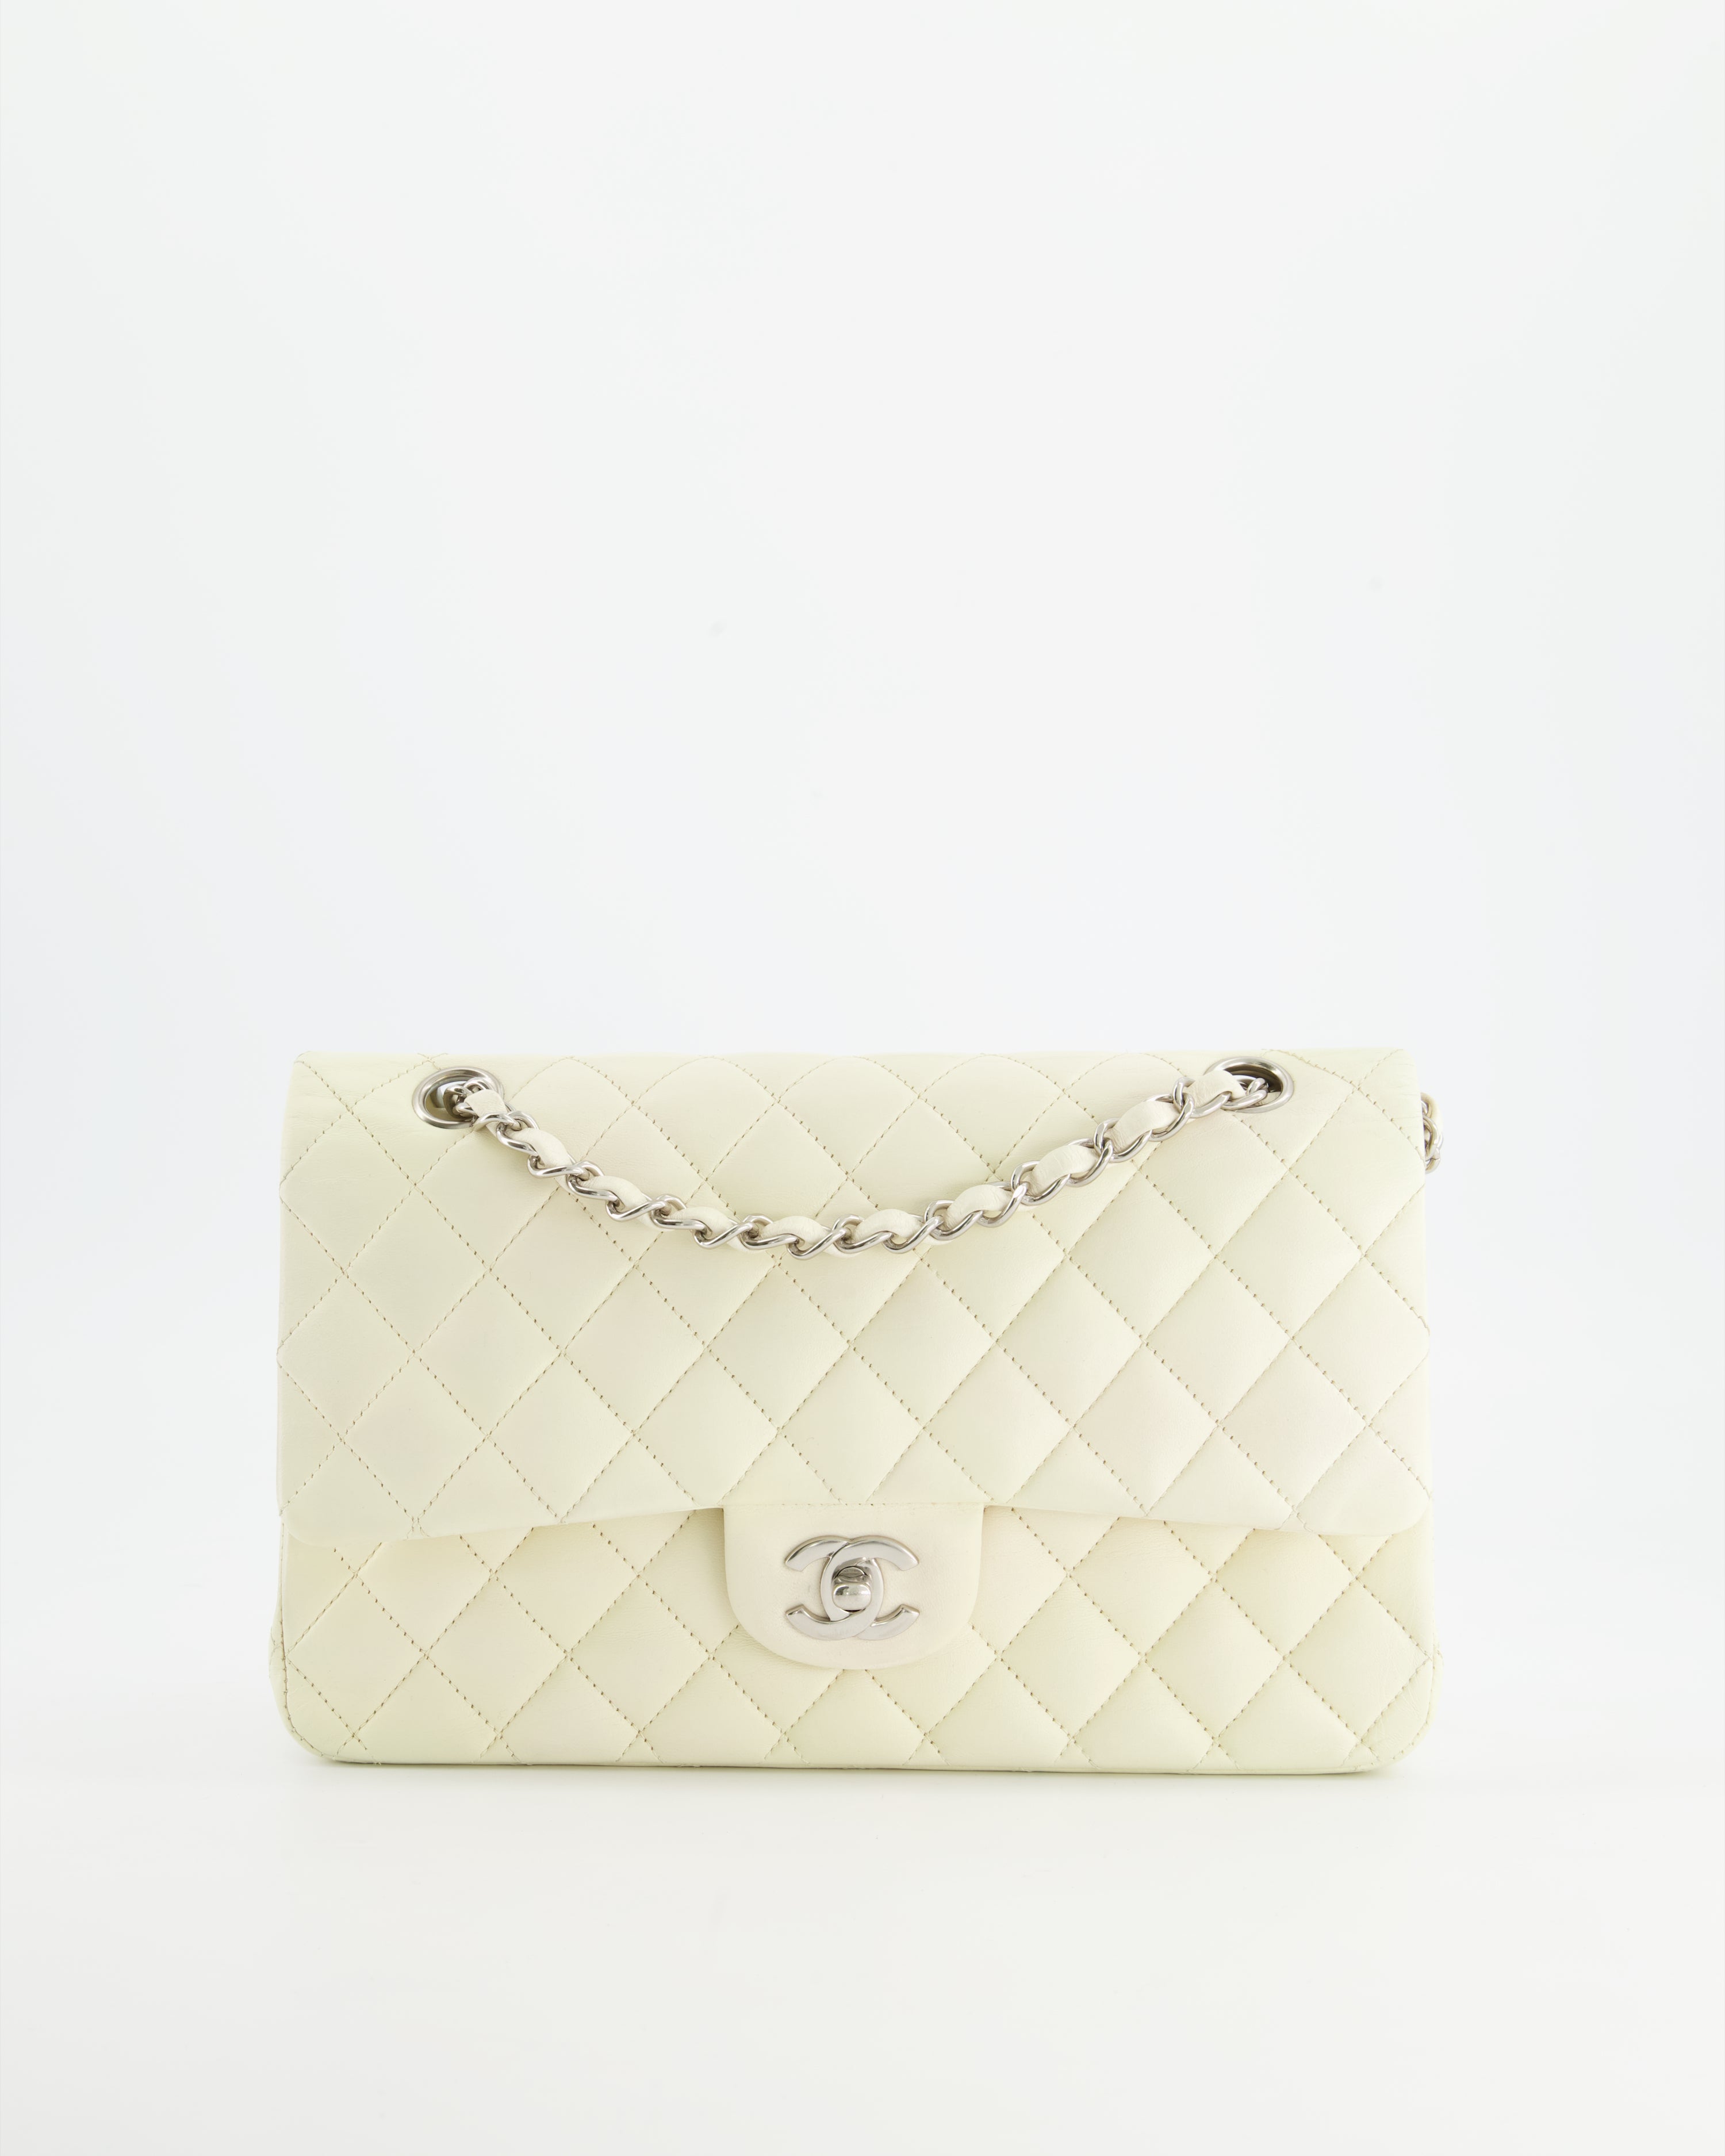 Chanel Cream Medium Double Flap Bag in Lambskin with Silver Hardware RRP - £8,530